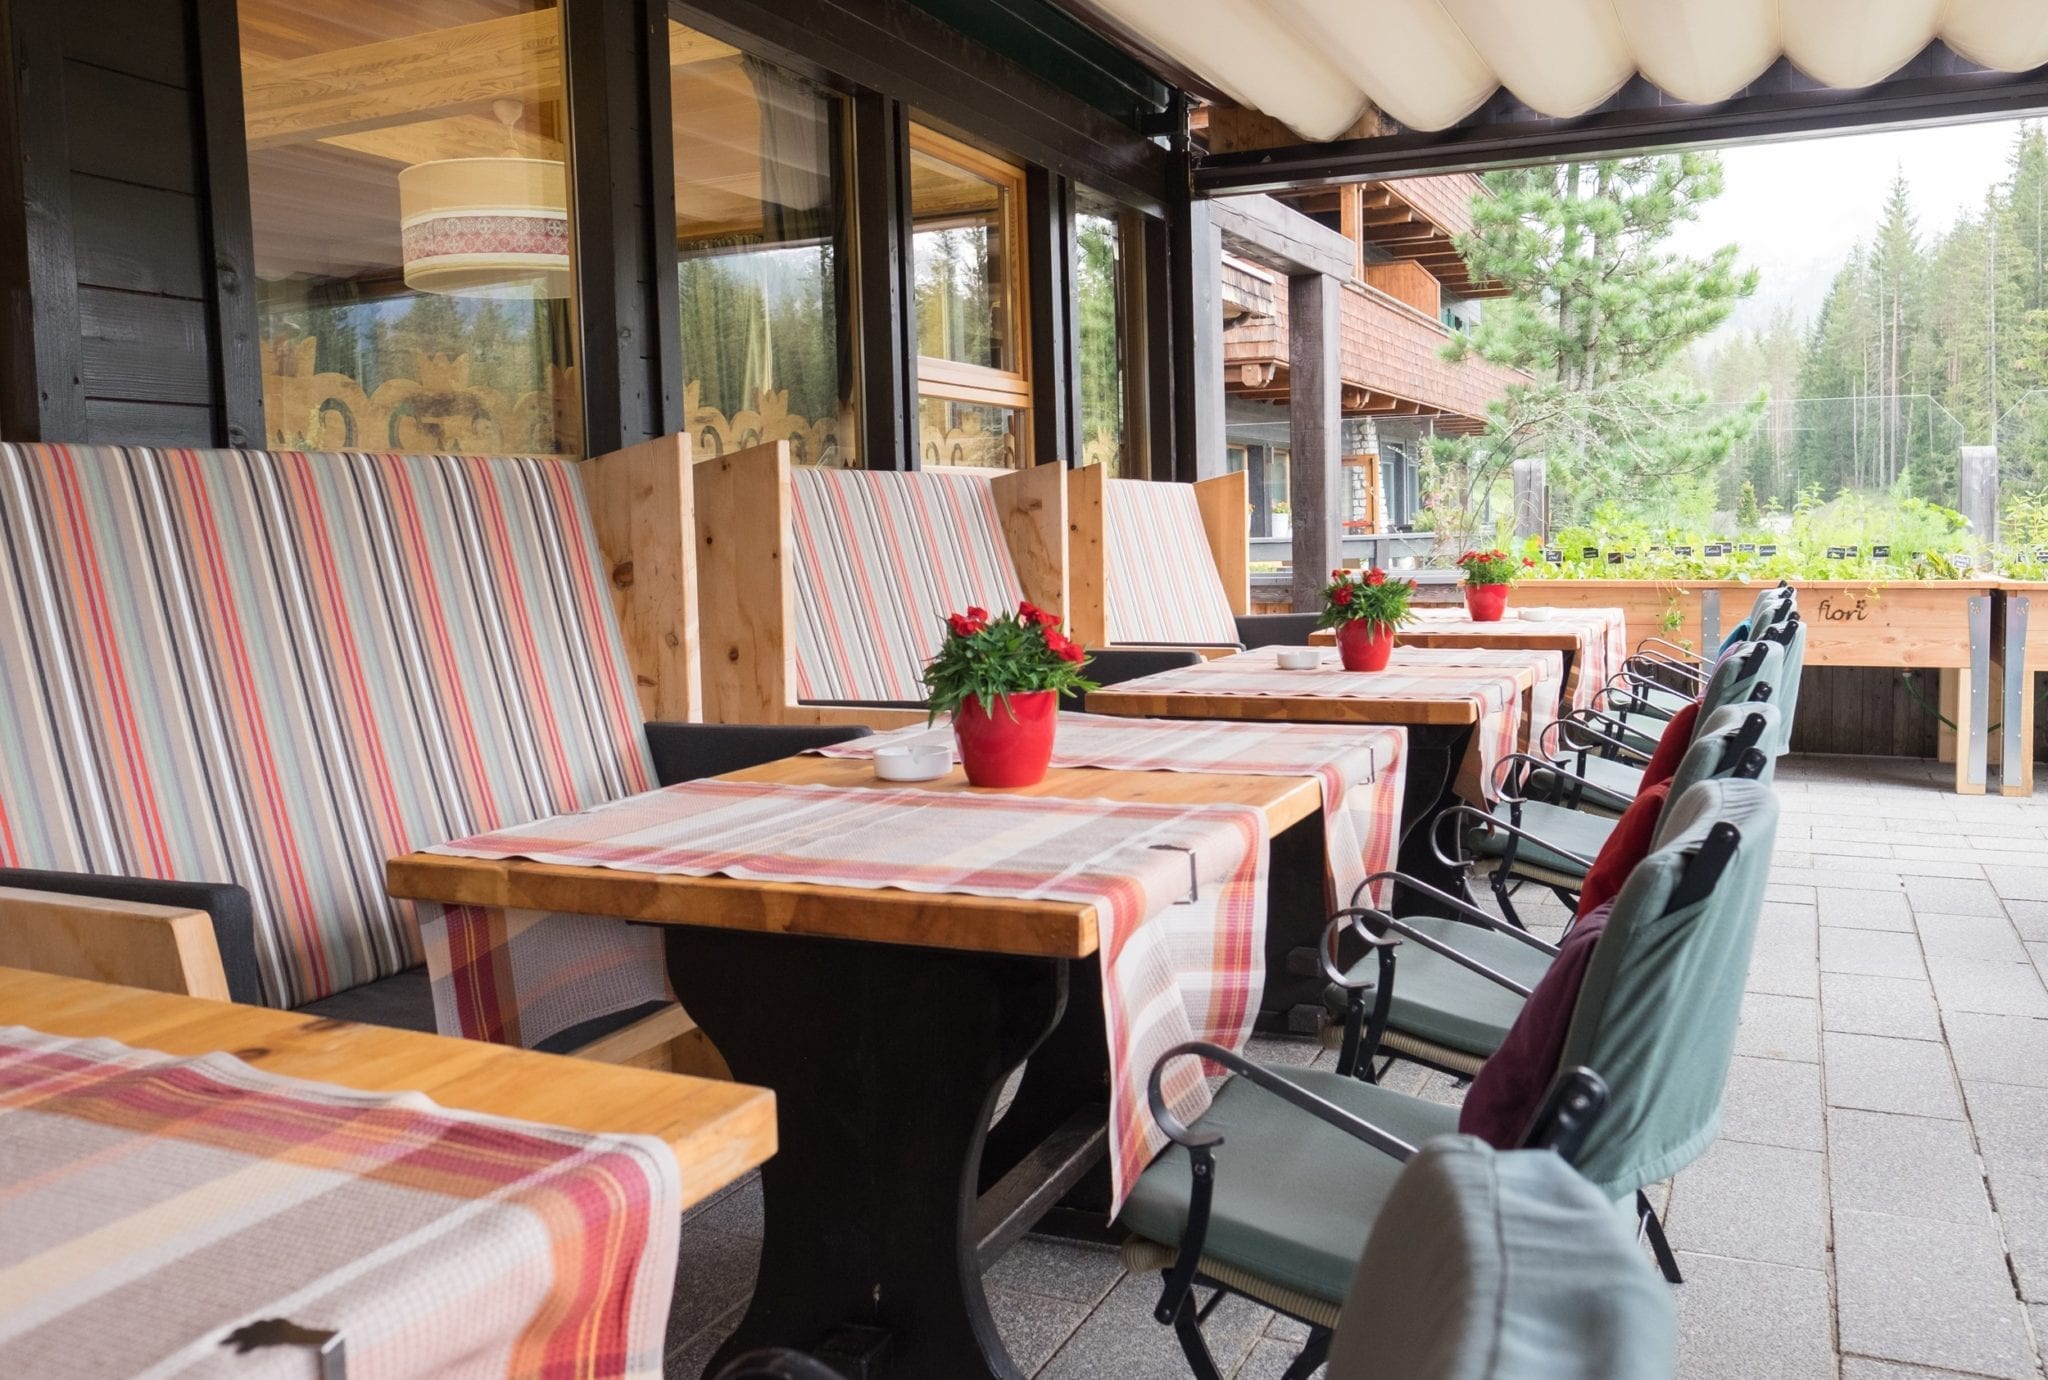 A patio with wooden booths and metal chairs, each table covered with a pot of red geraniums.